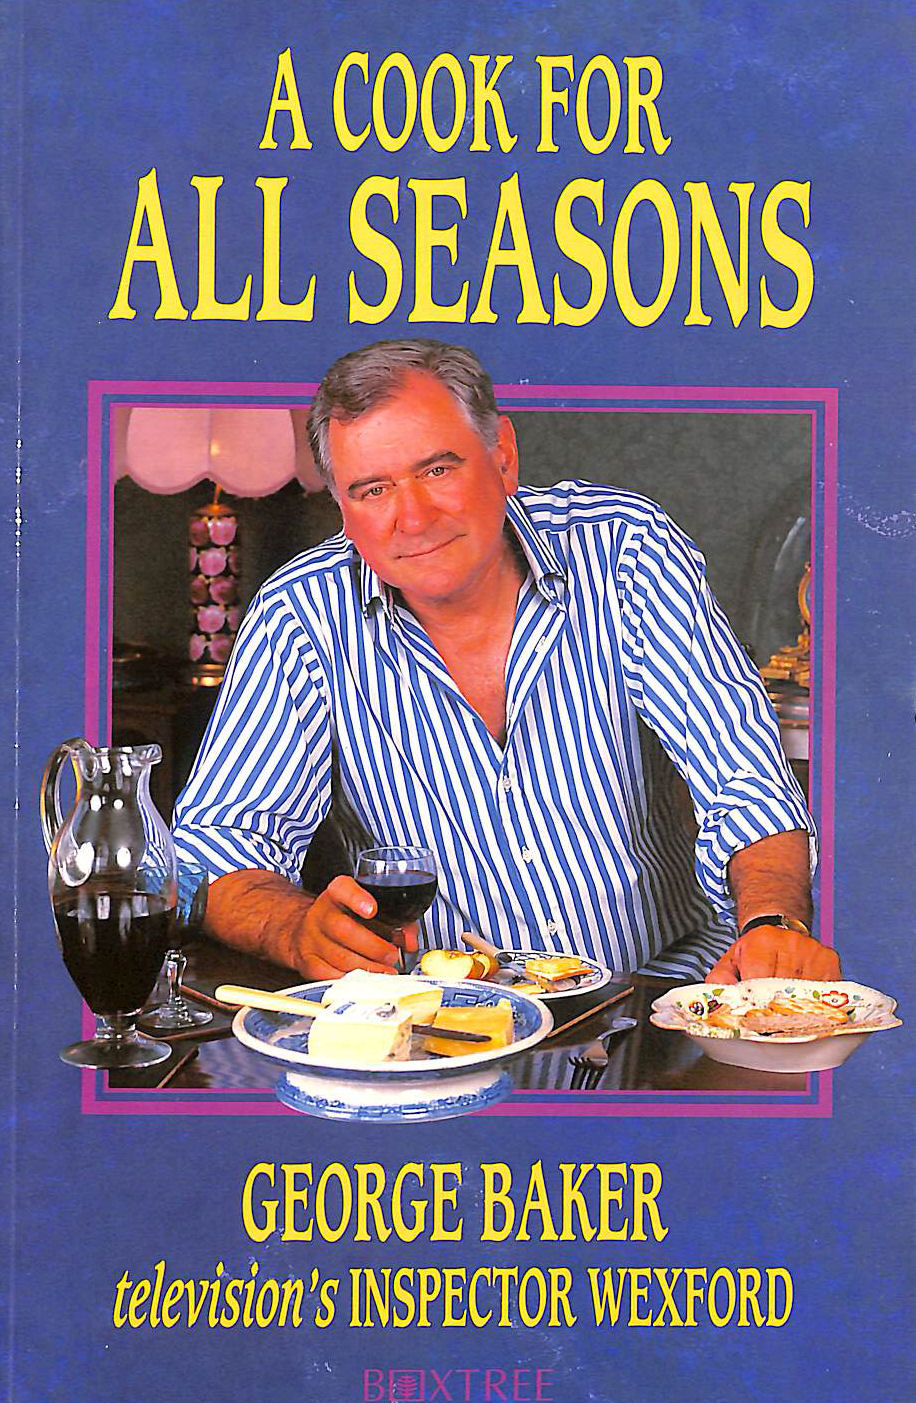 BAKER, GEORGE - A Cook for All Seasons